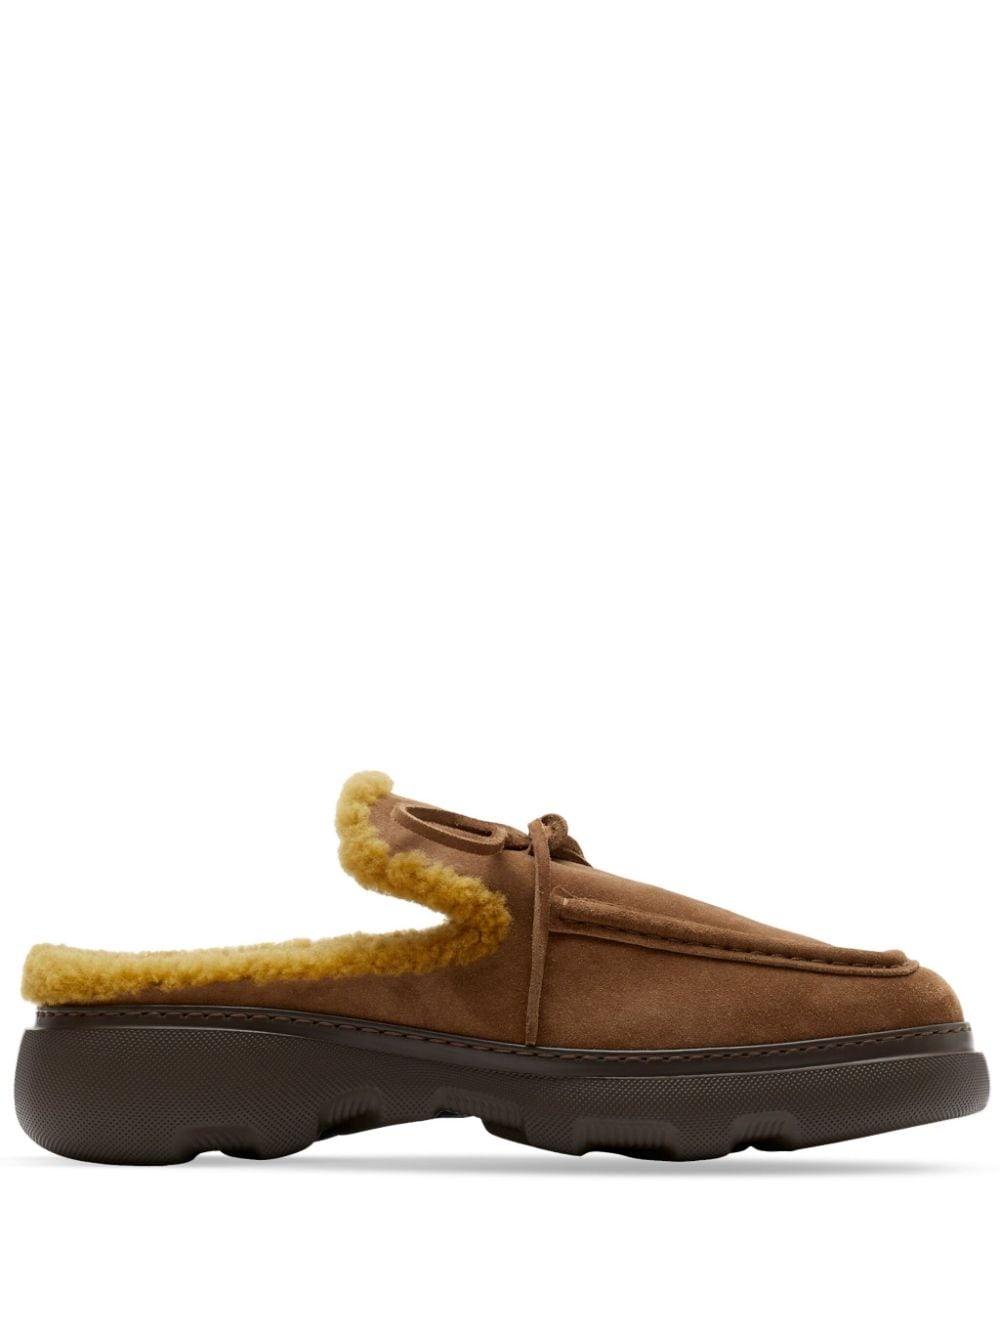 Burberry Stony shearling-trim suede slippers - Brown von Burberry